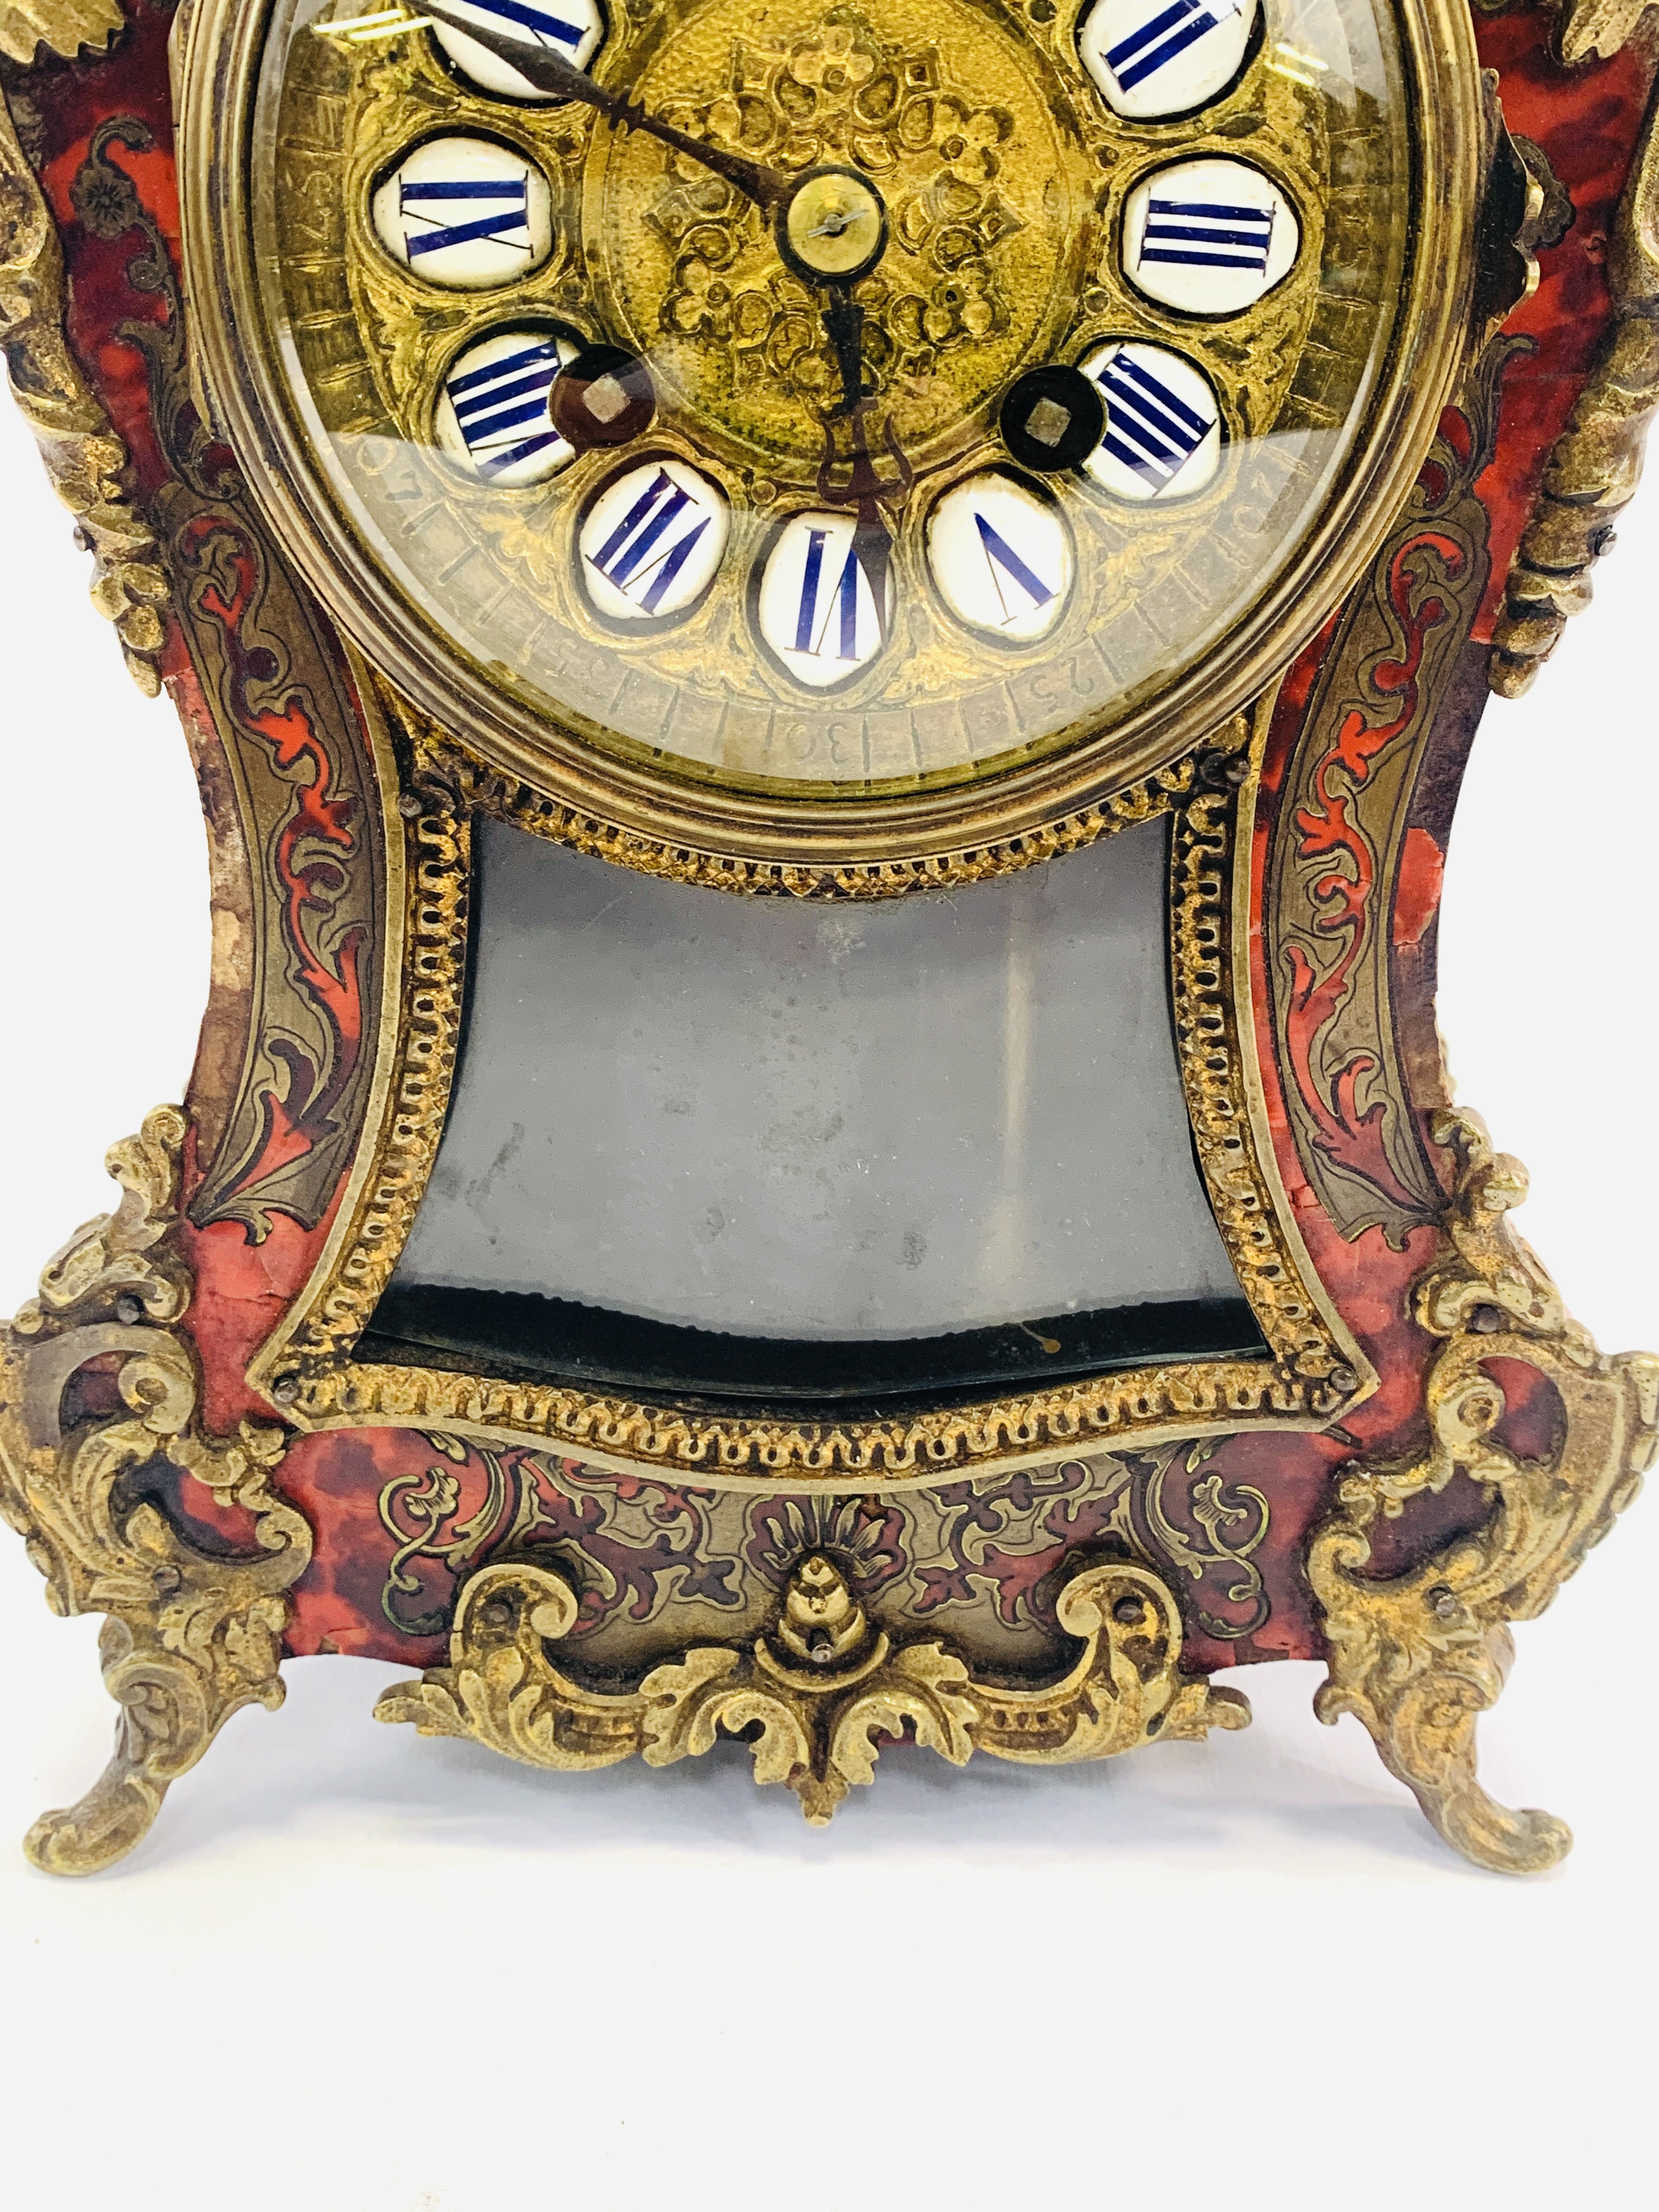 French boulle work mantel clock - Image 7 of 8